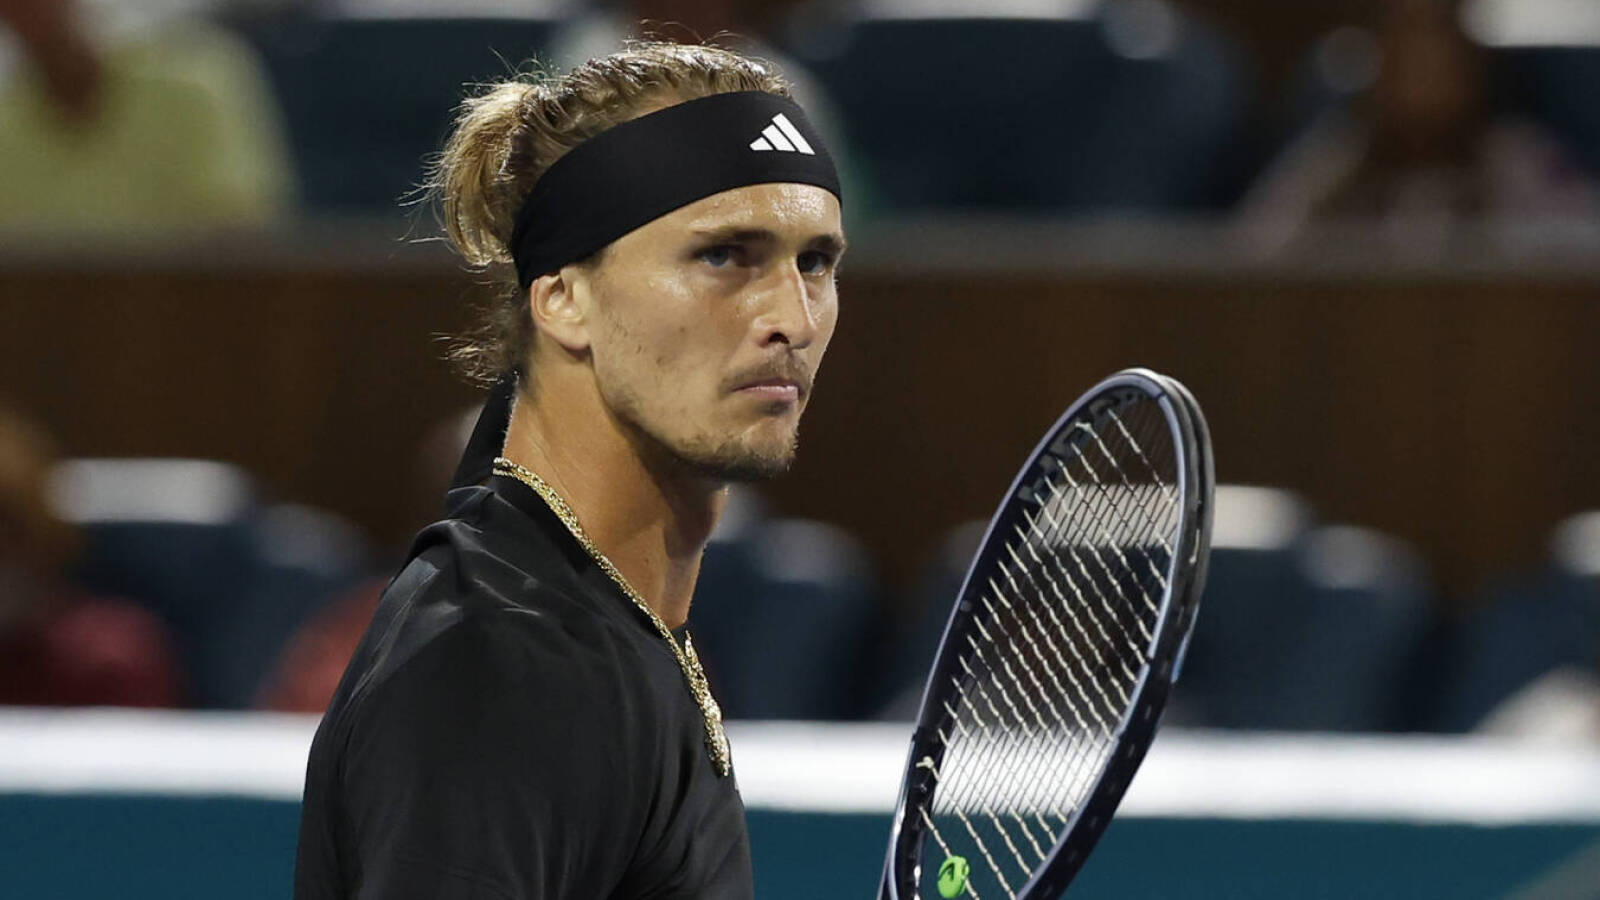 'We had to play against Djokovic, Nadal, and Federer in our first years,' Alexander Zverev explains why it was difficult for players from his generation to win Grand Slam titles